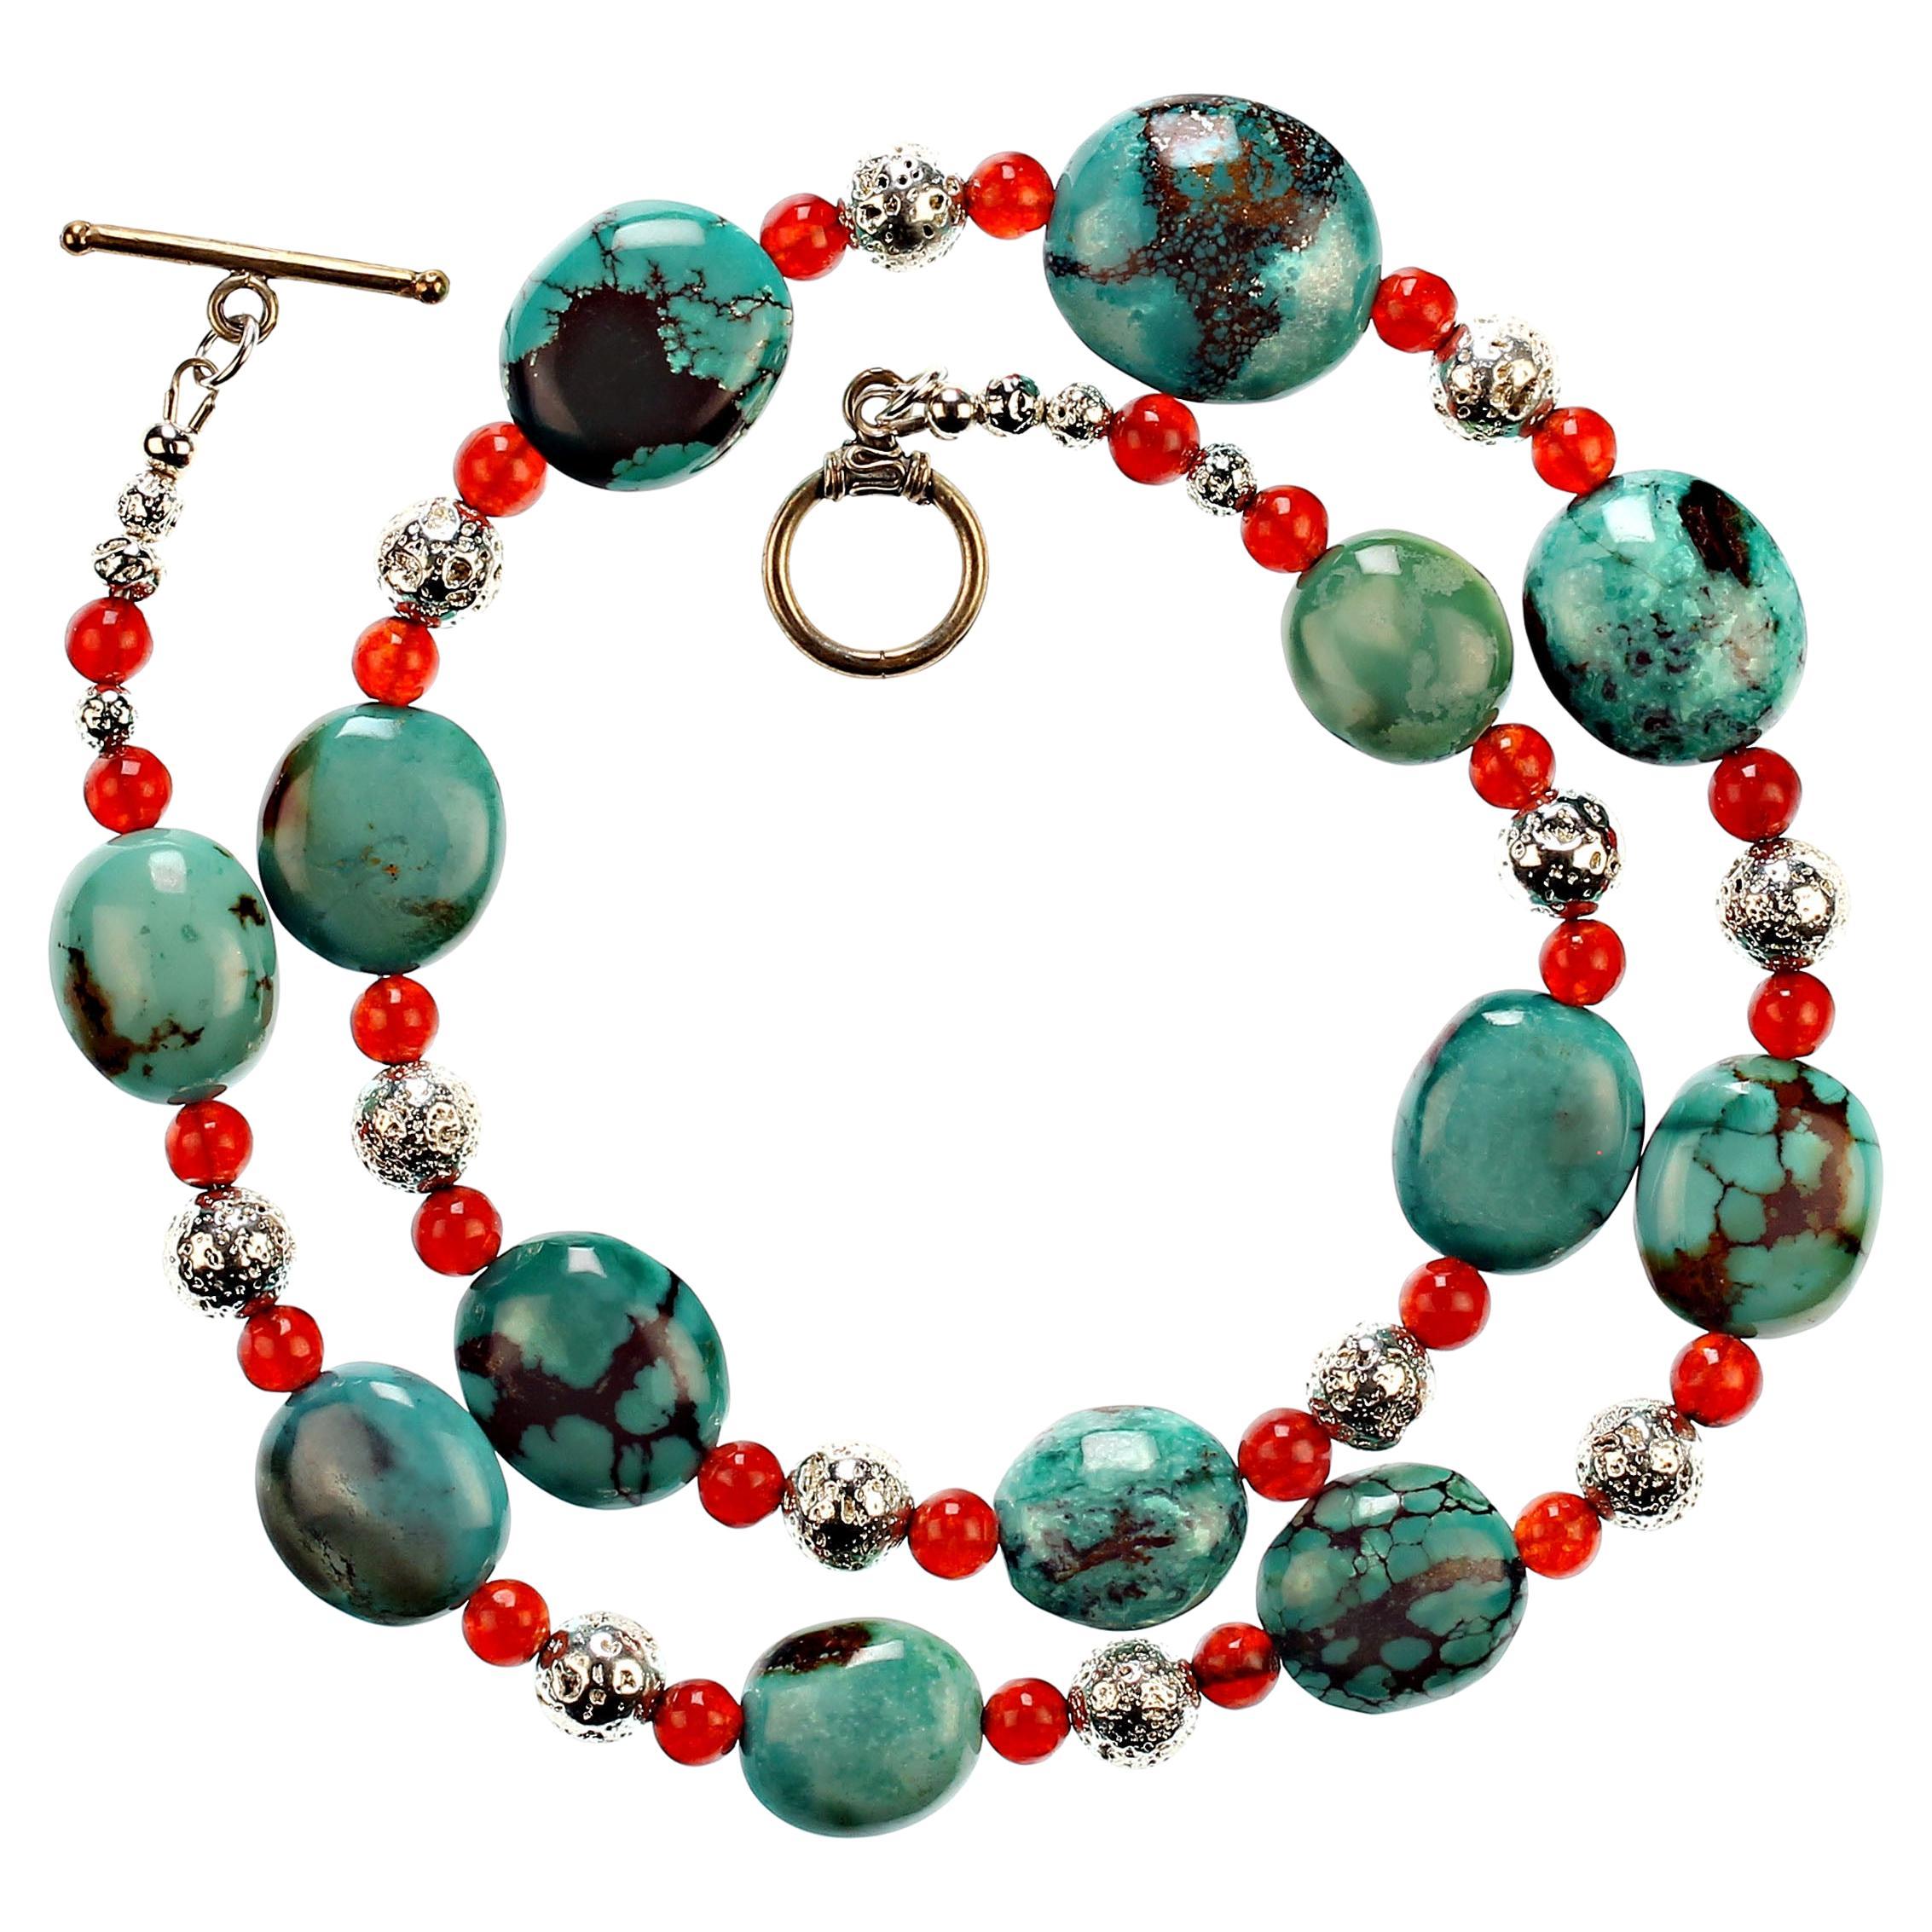 AJD 22 Inch Southwest Influence Necklace of Turquoise, Carnelian, and Silver